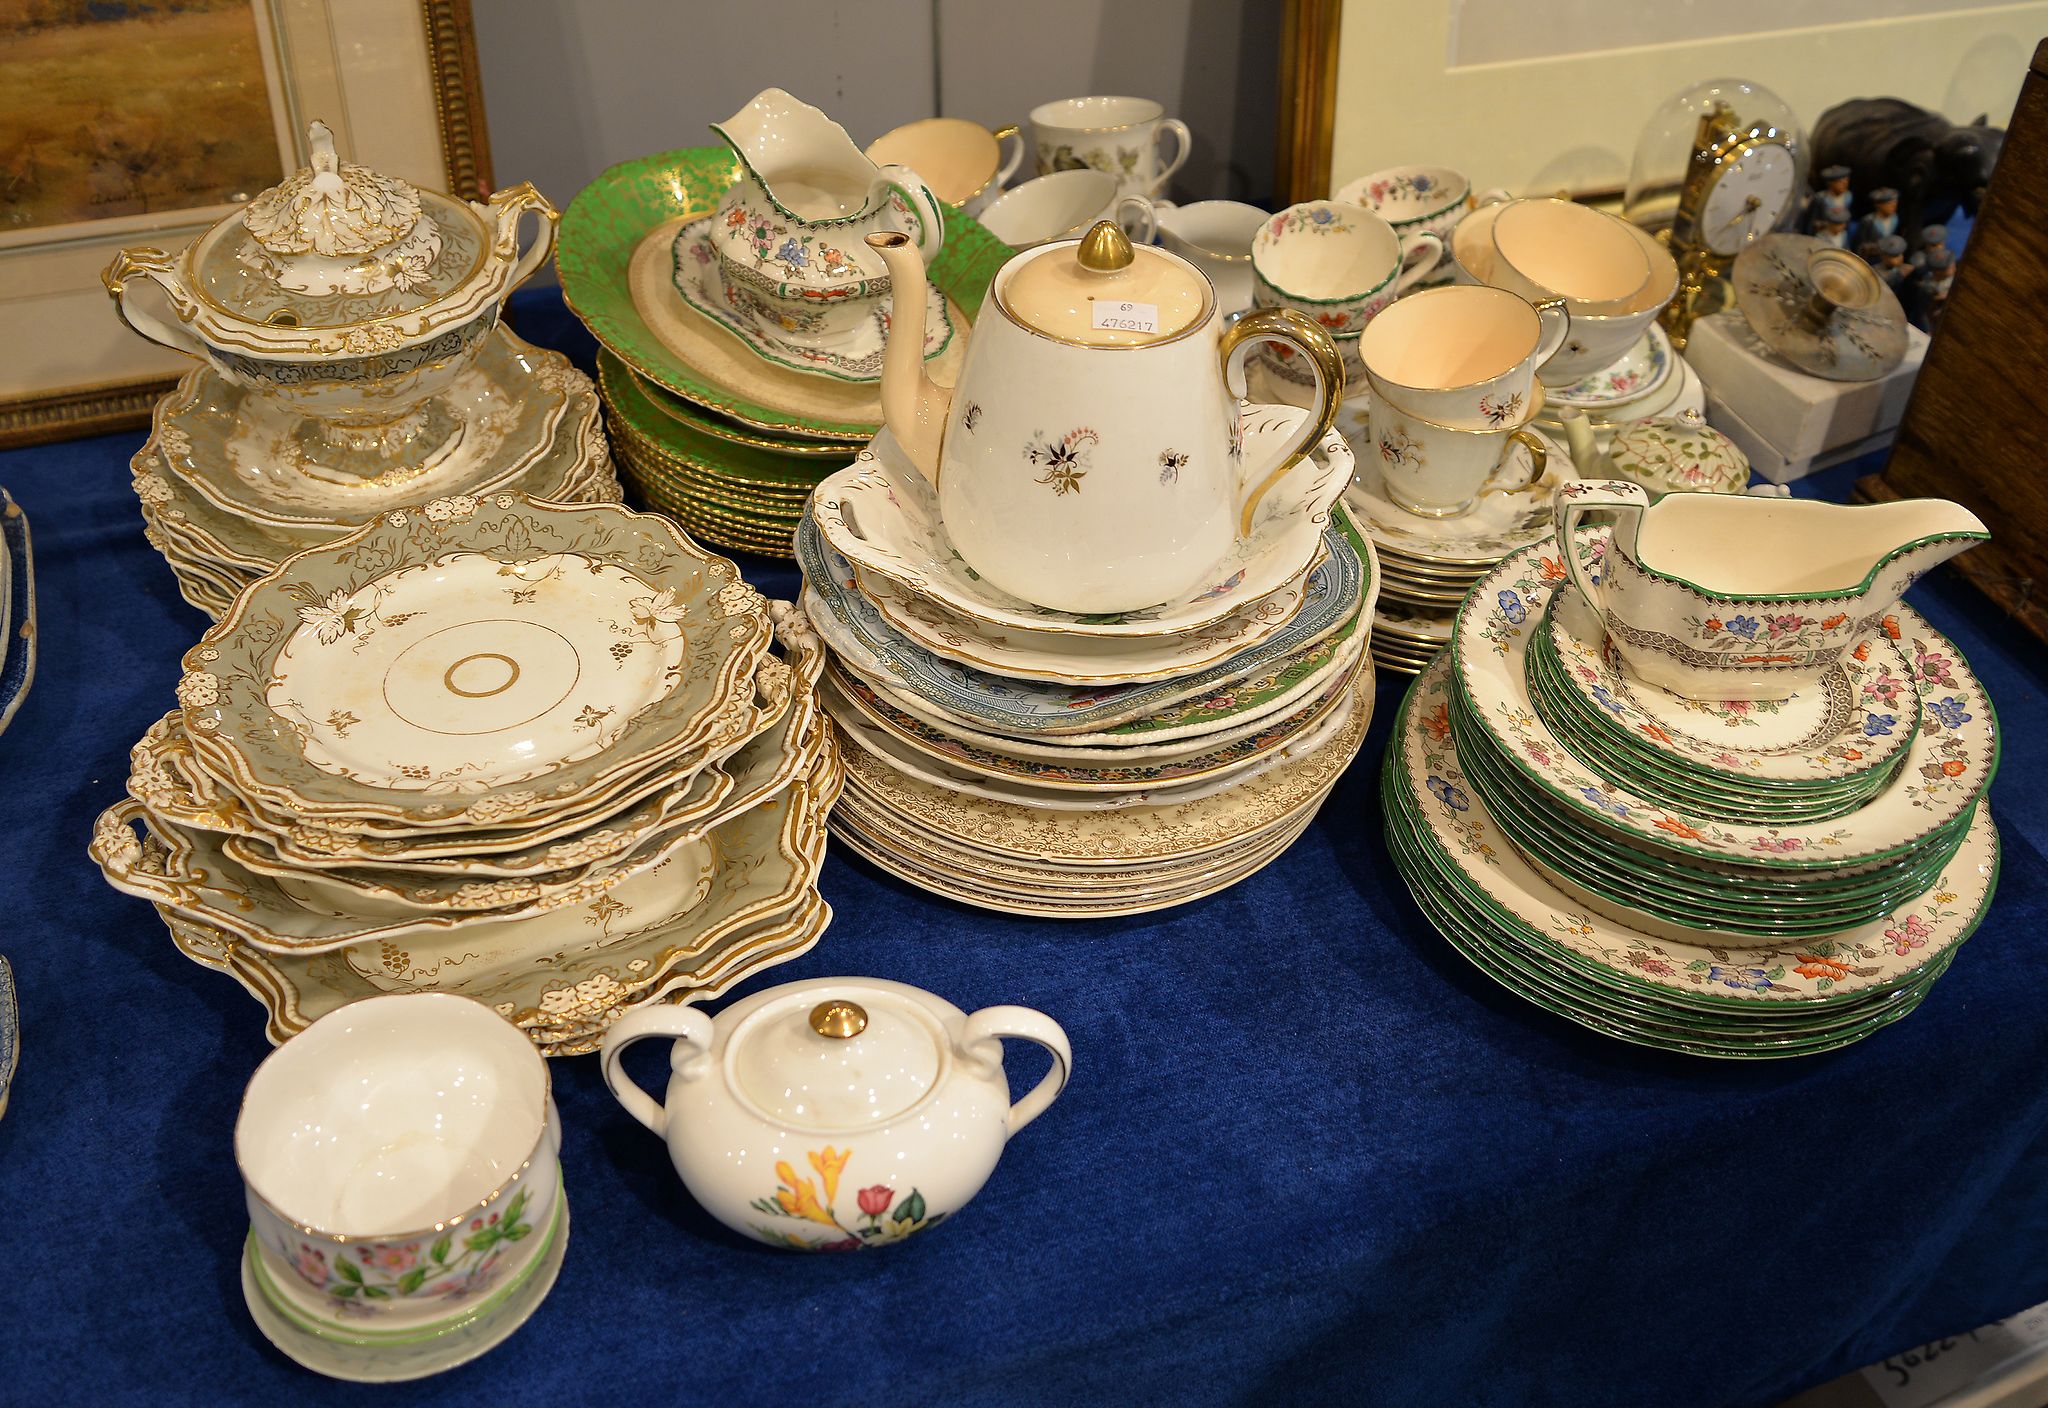 A 19th century Ridgway grey and gilt bordered part dessert service, and other part services